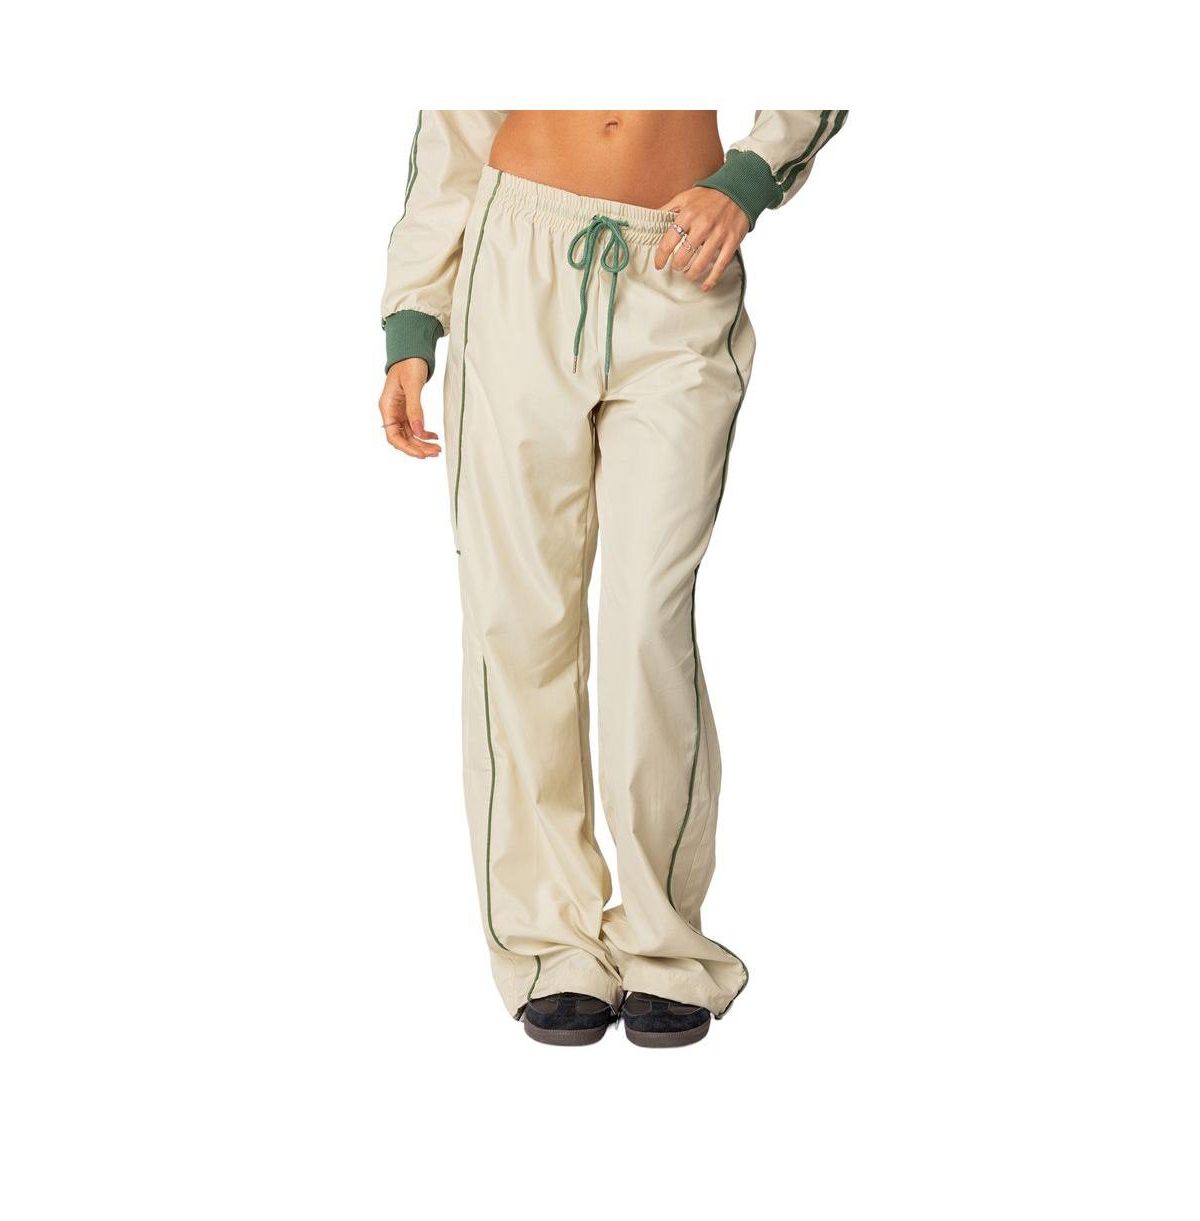 Women's Superstar nylon track pants - Off-white-and-olive